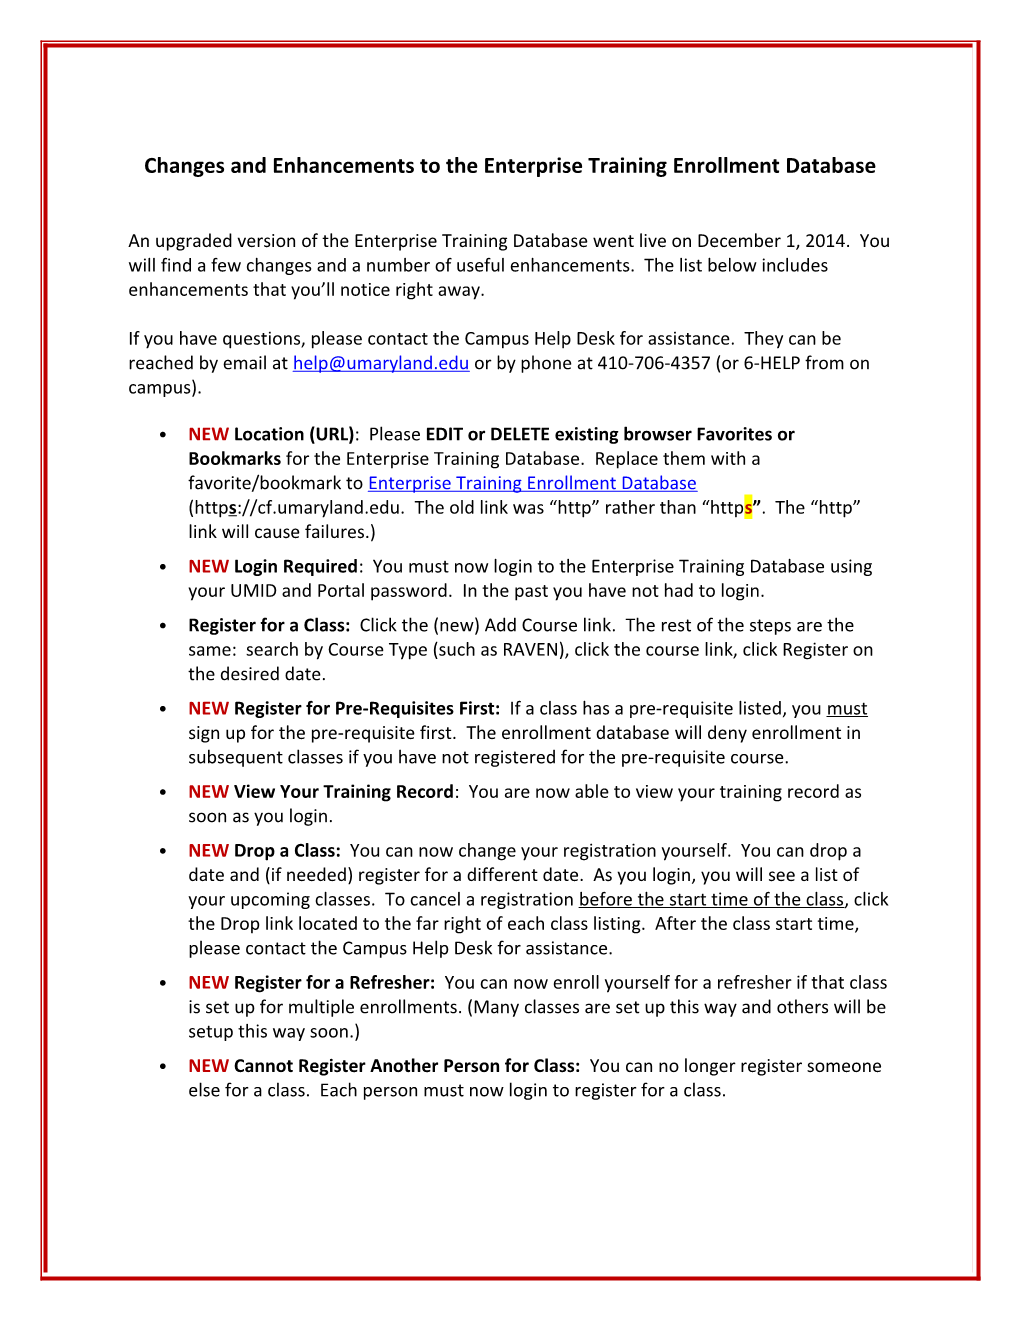 Changes and Enhancements to the Enterprise Training Enrollment Database